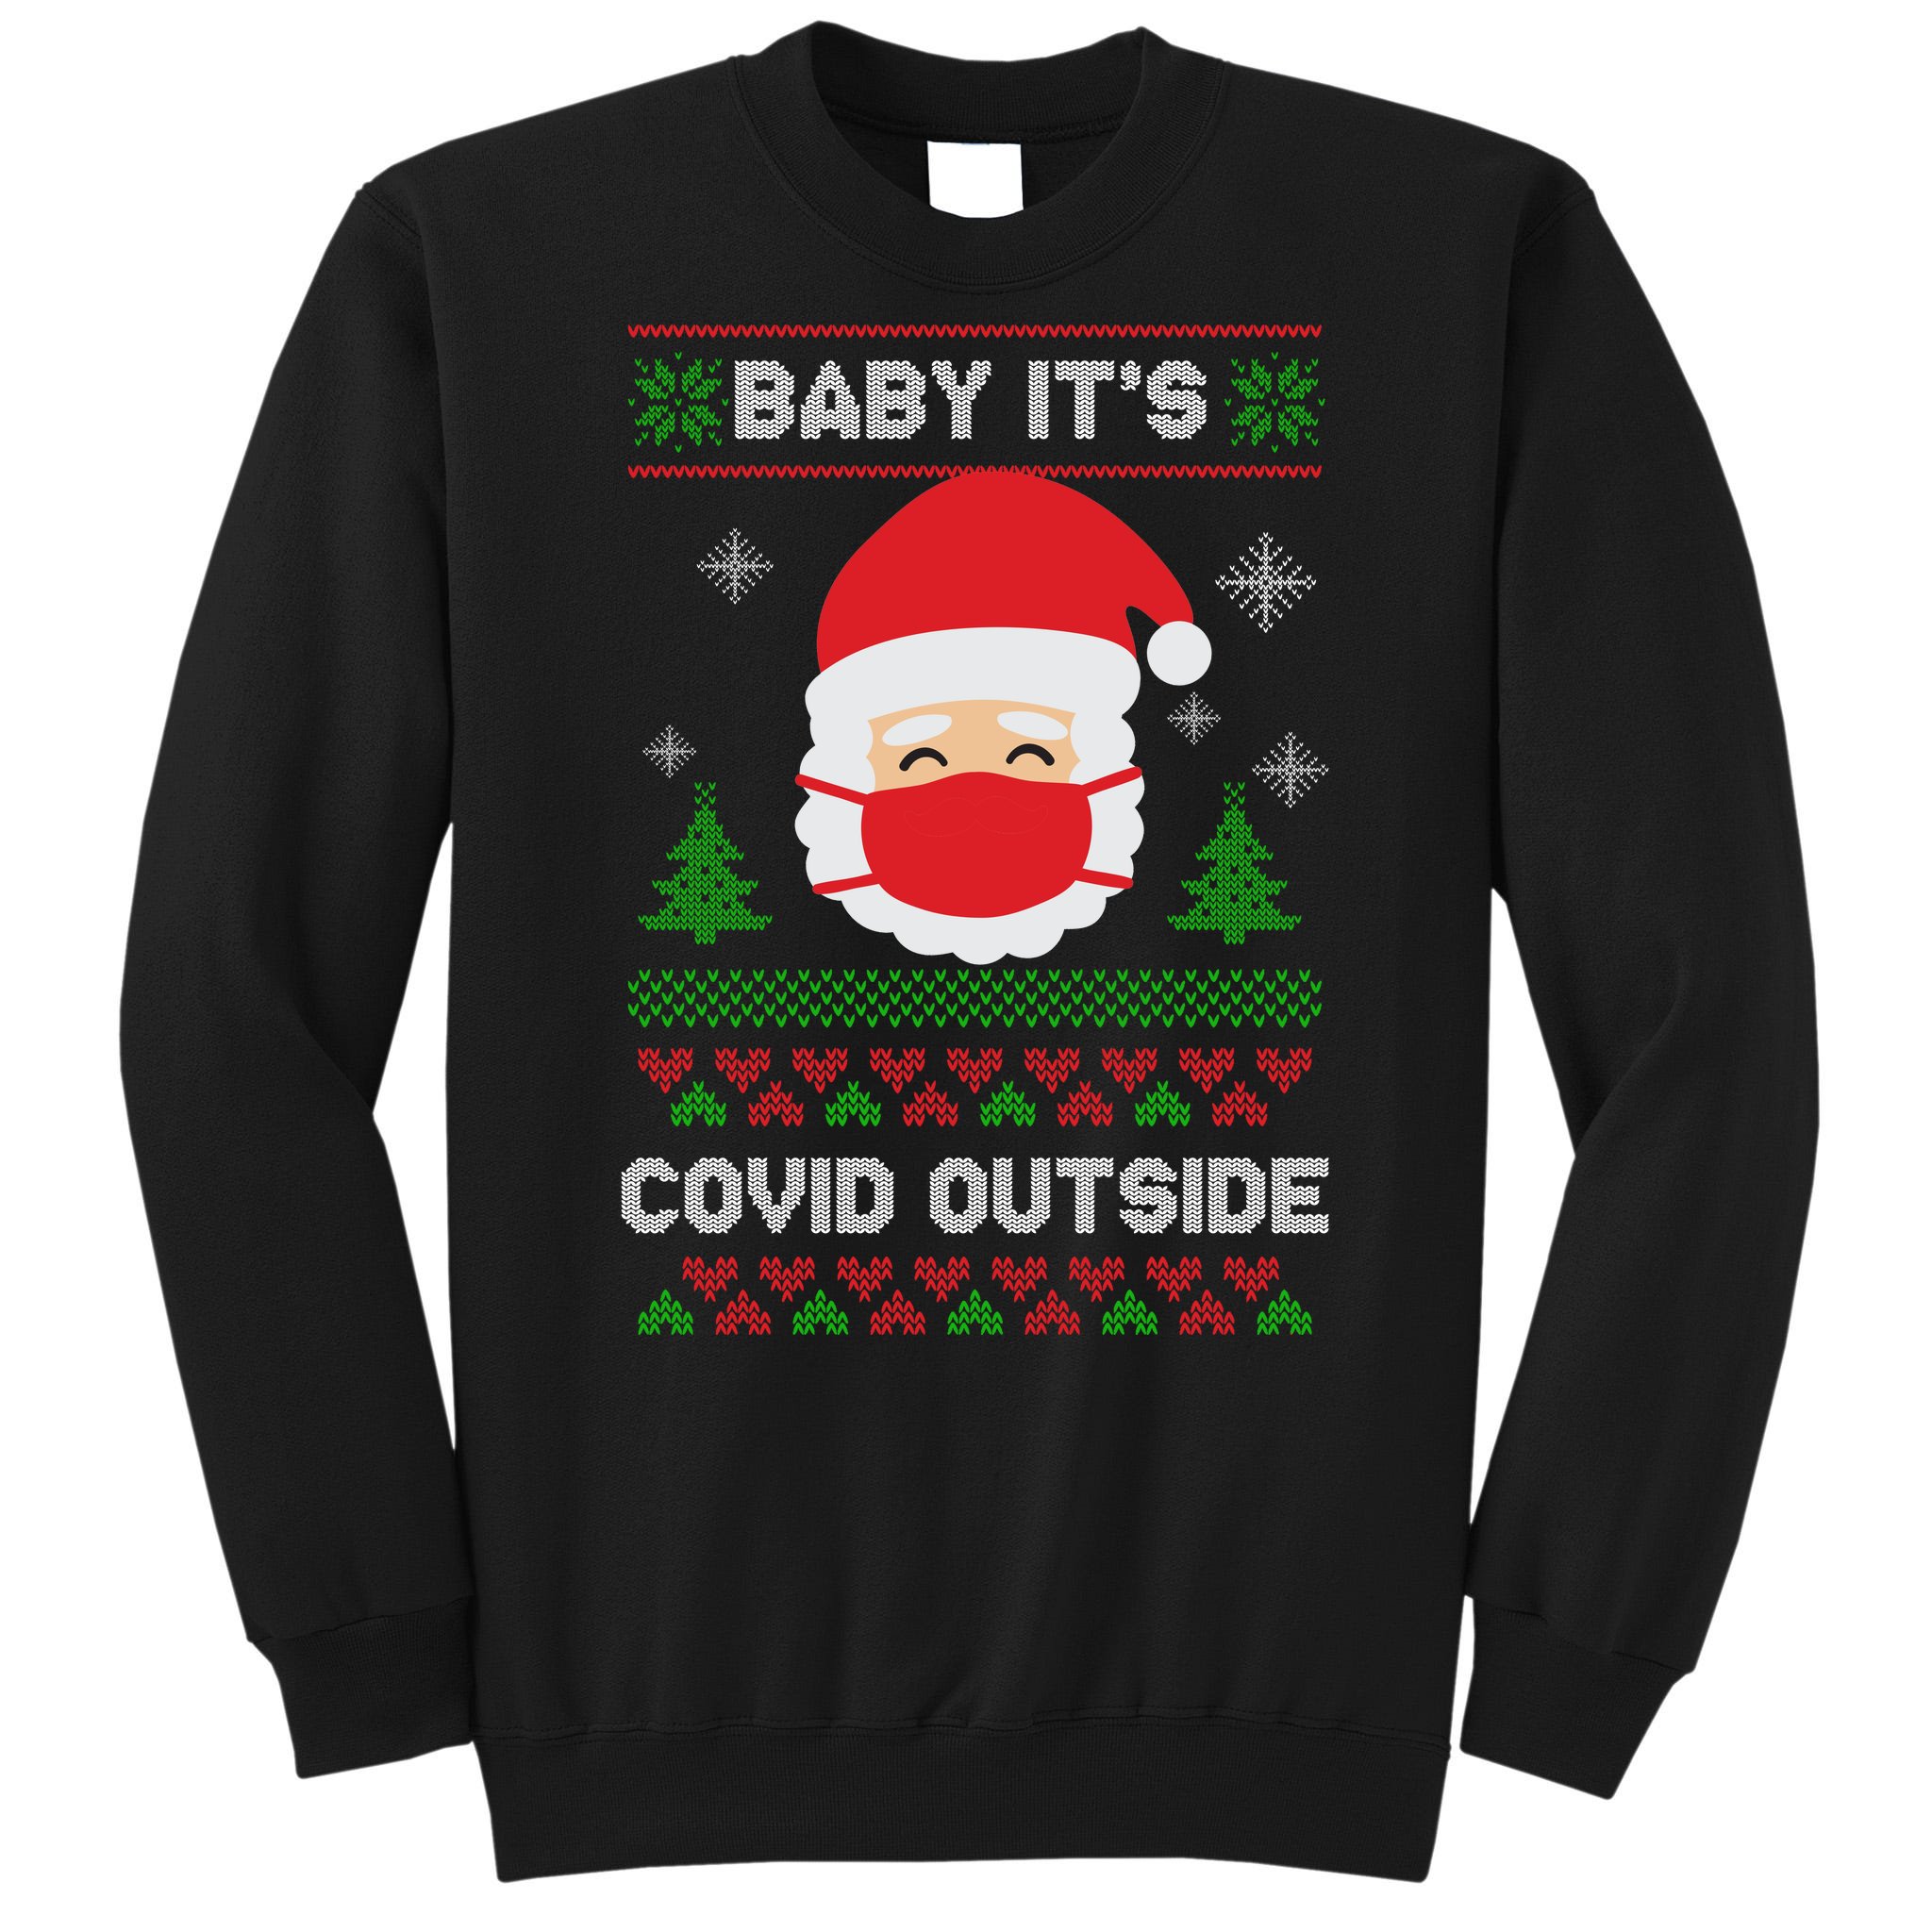 2020 Quarantine Christmas Baby It's Covid Outside Sweater Christmas Gnomes with Masks Matching Family Funny Christmas Sweatshirt